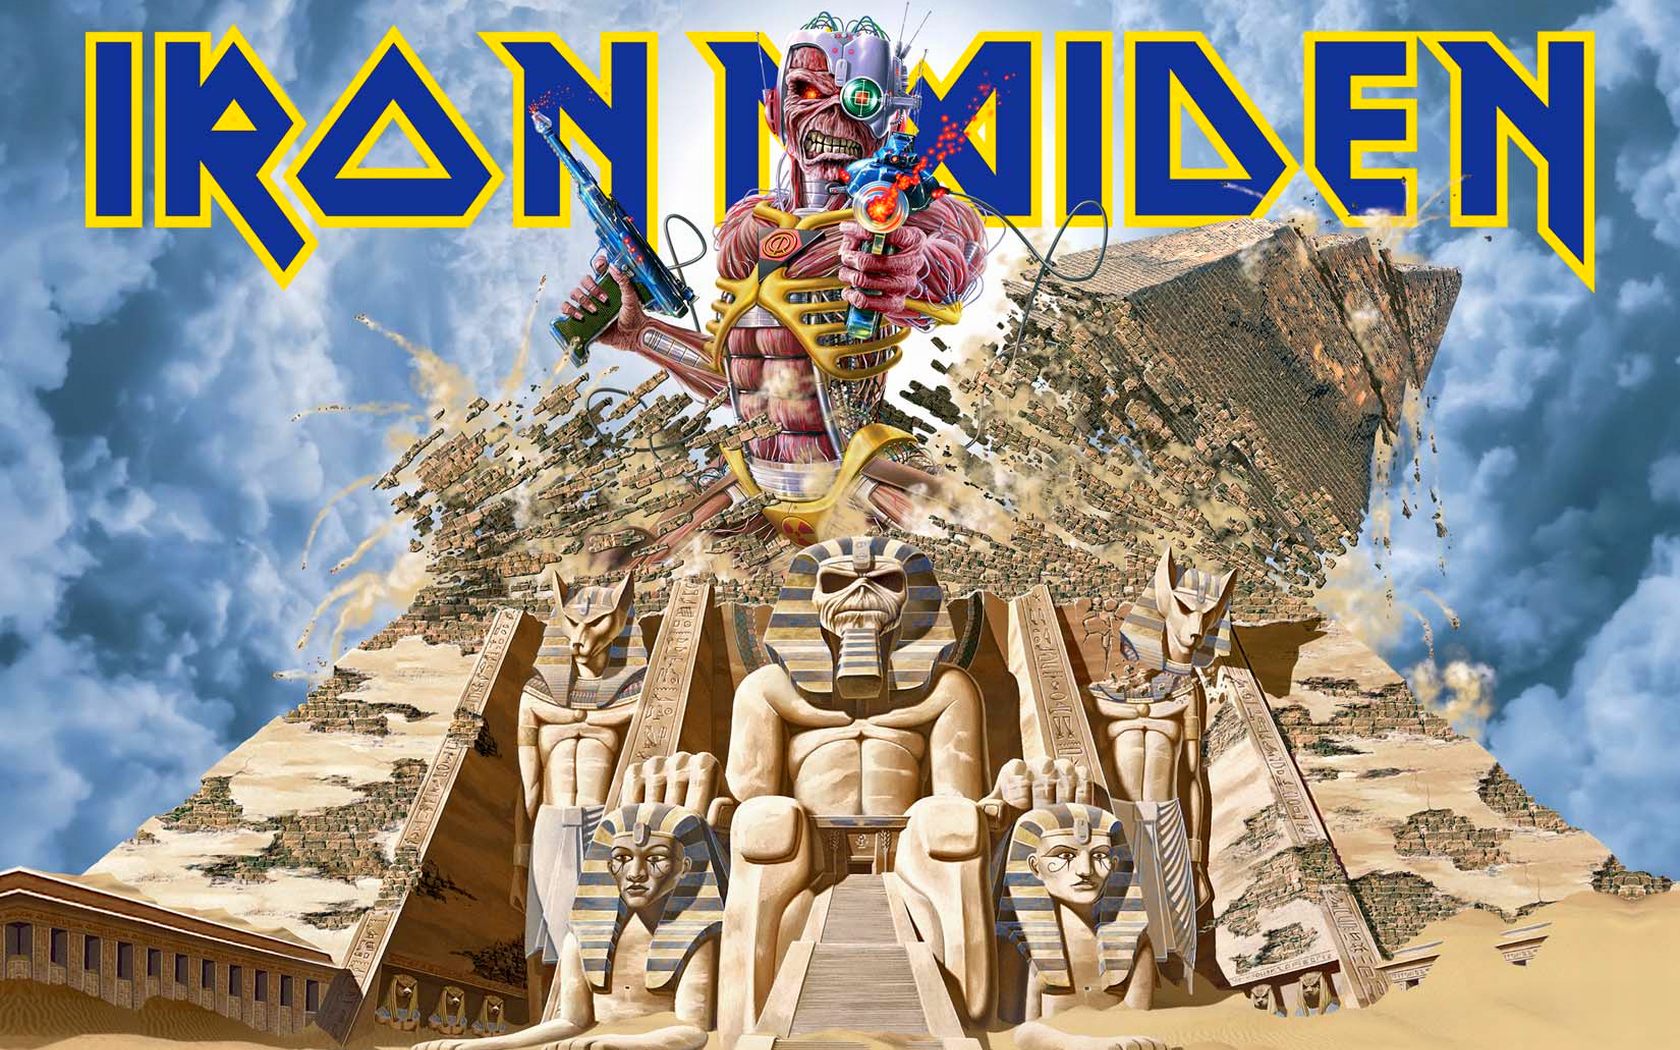 Iron Maiden Wallpaper and Background Imagex1050